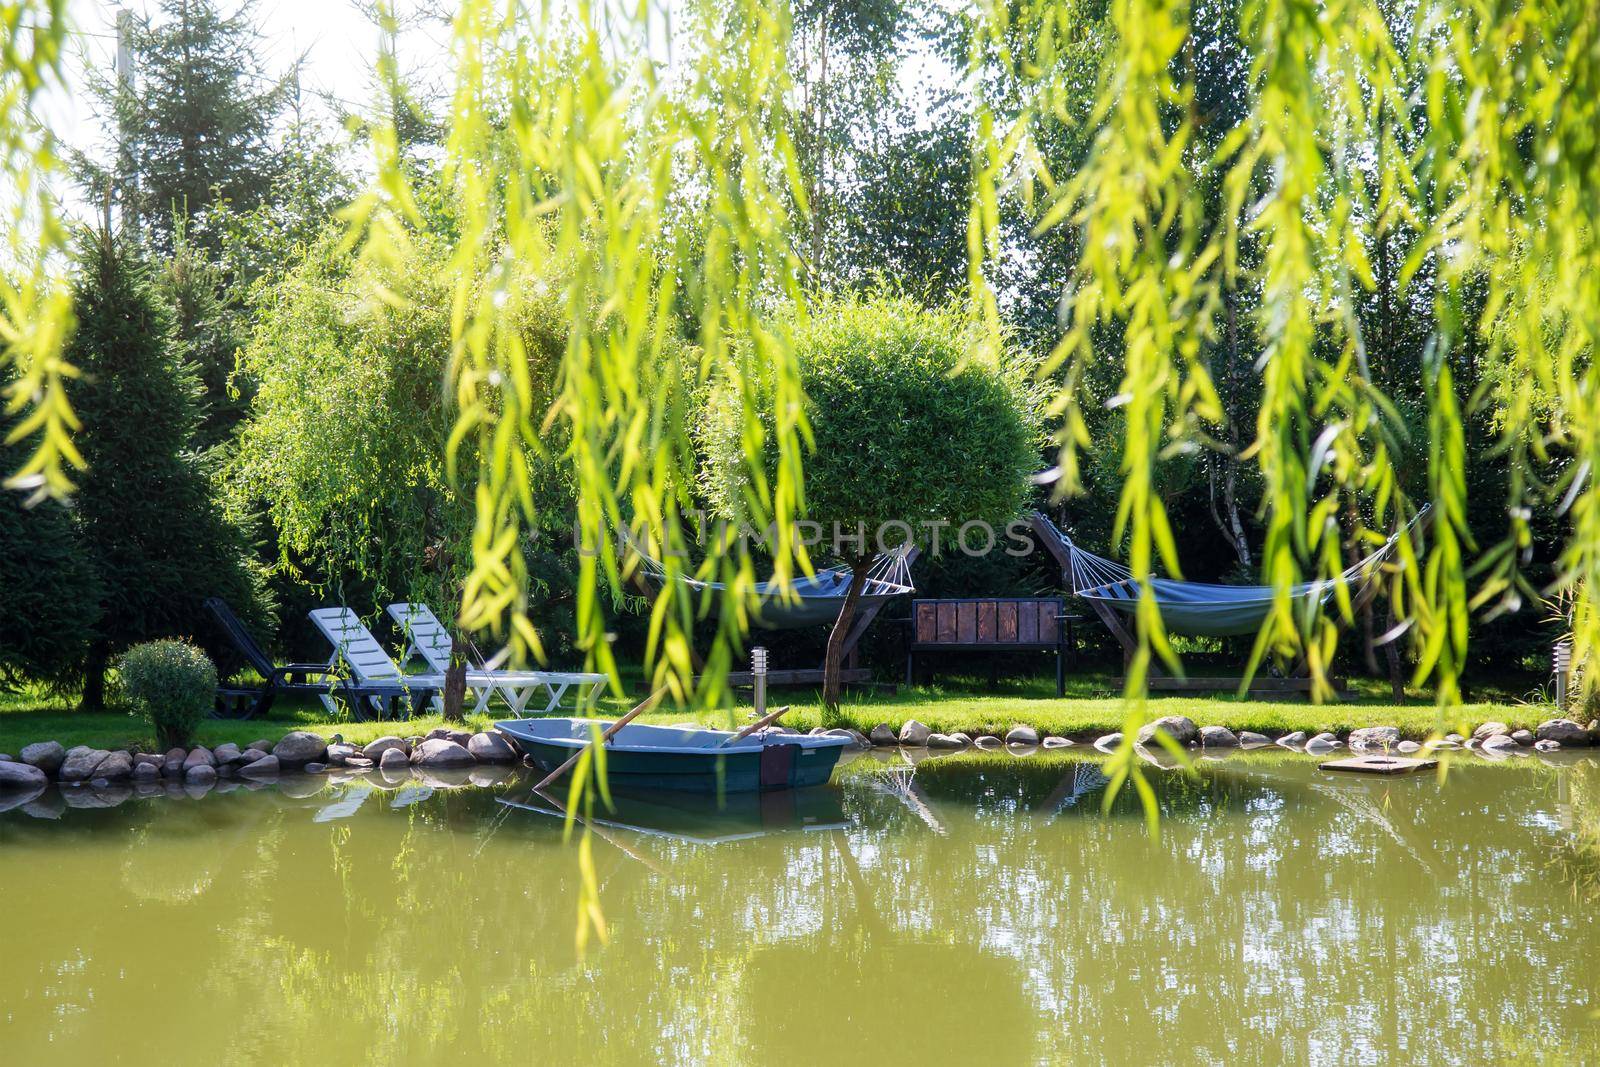 Rural landscape on a sunny summer day. A small lake with wooden boats and a place to relax surrounded by green trees. There are no people around. concept of tranquility meditation and balance